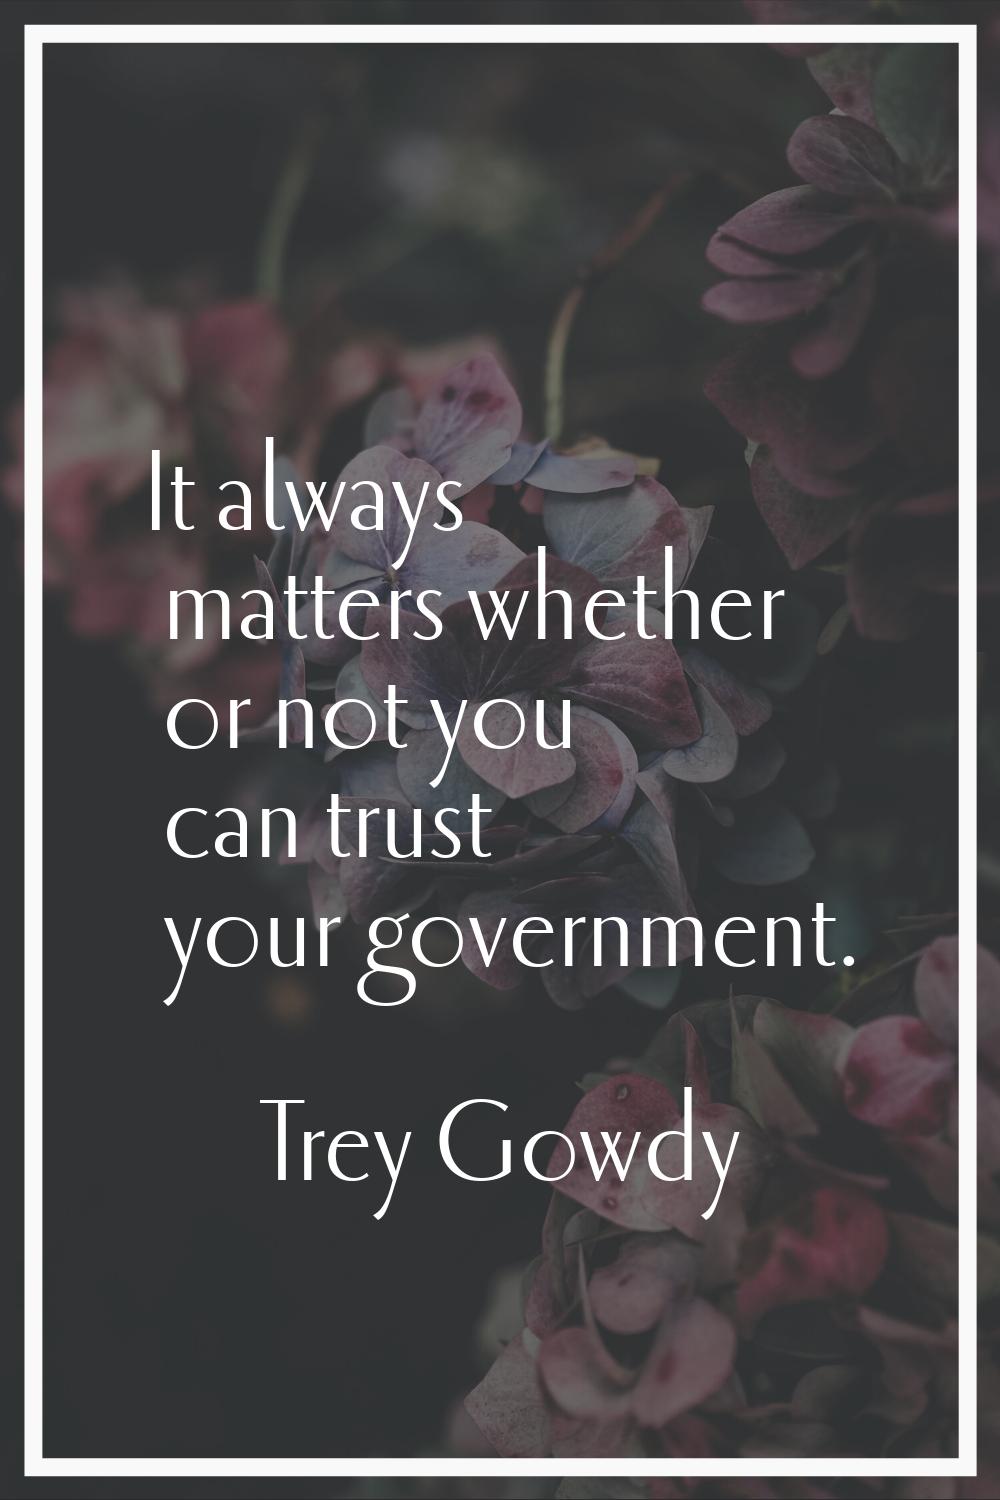 It always matters whether or not you can trust your government.